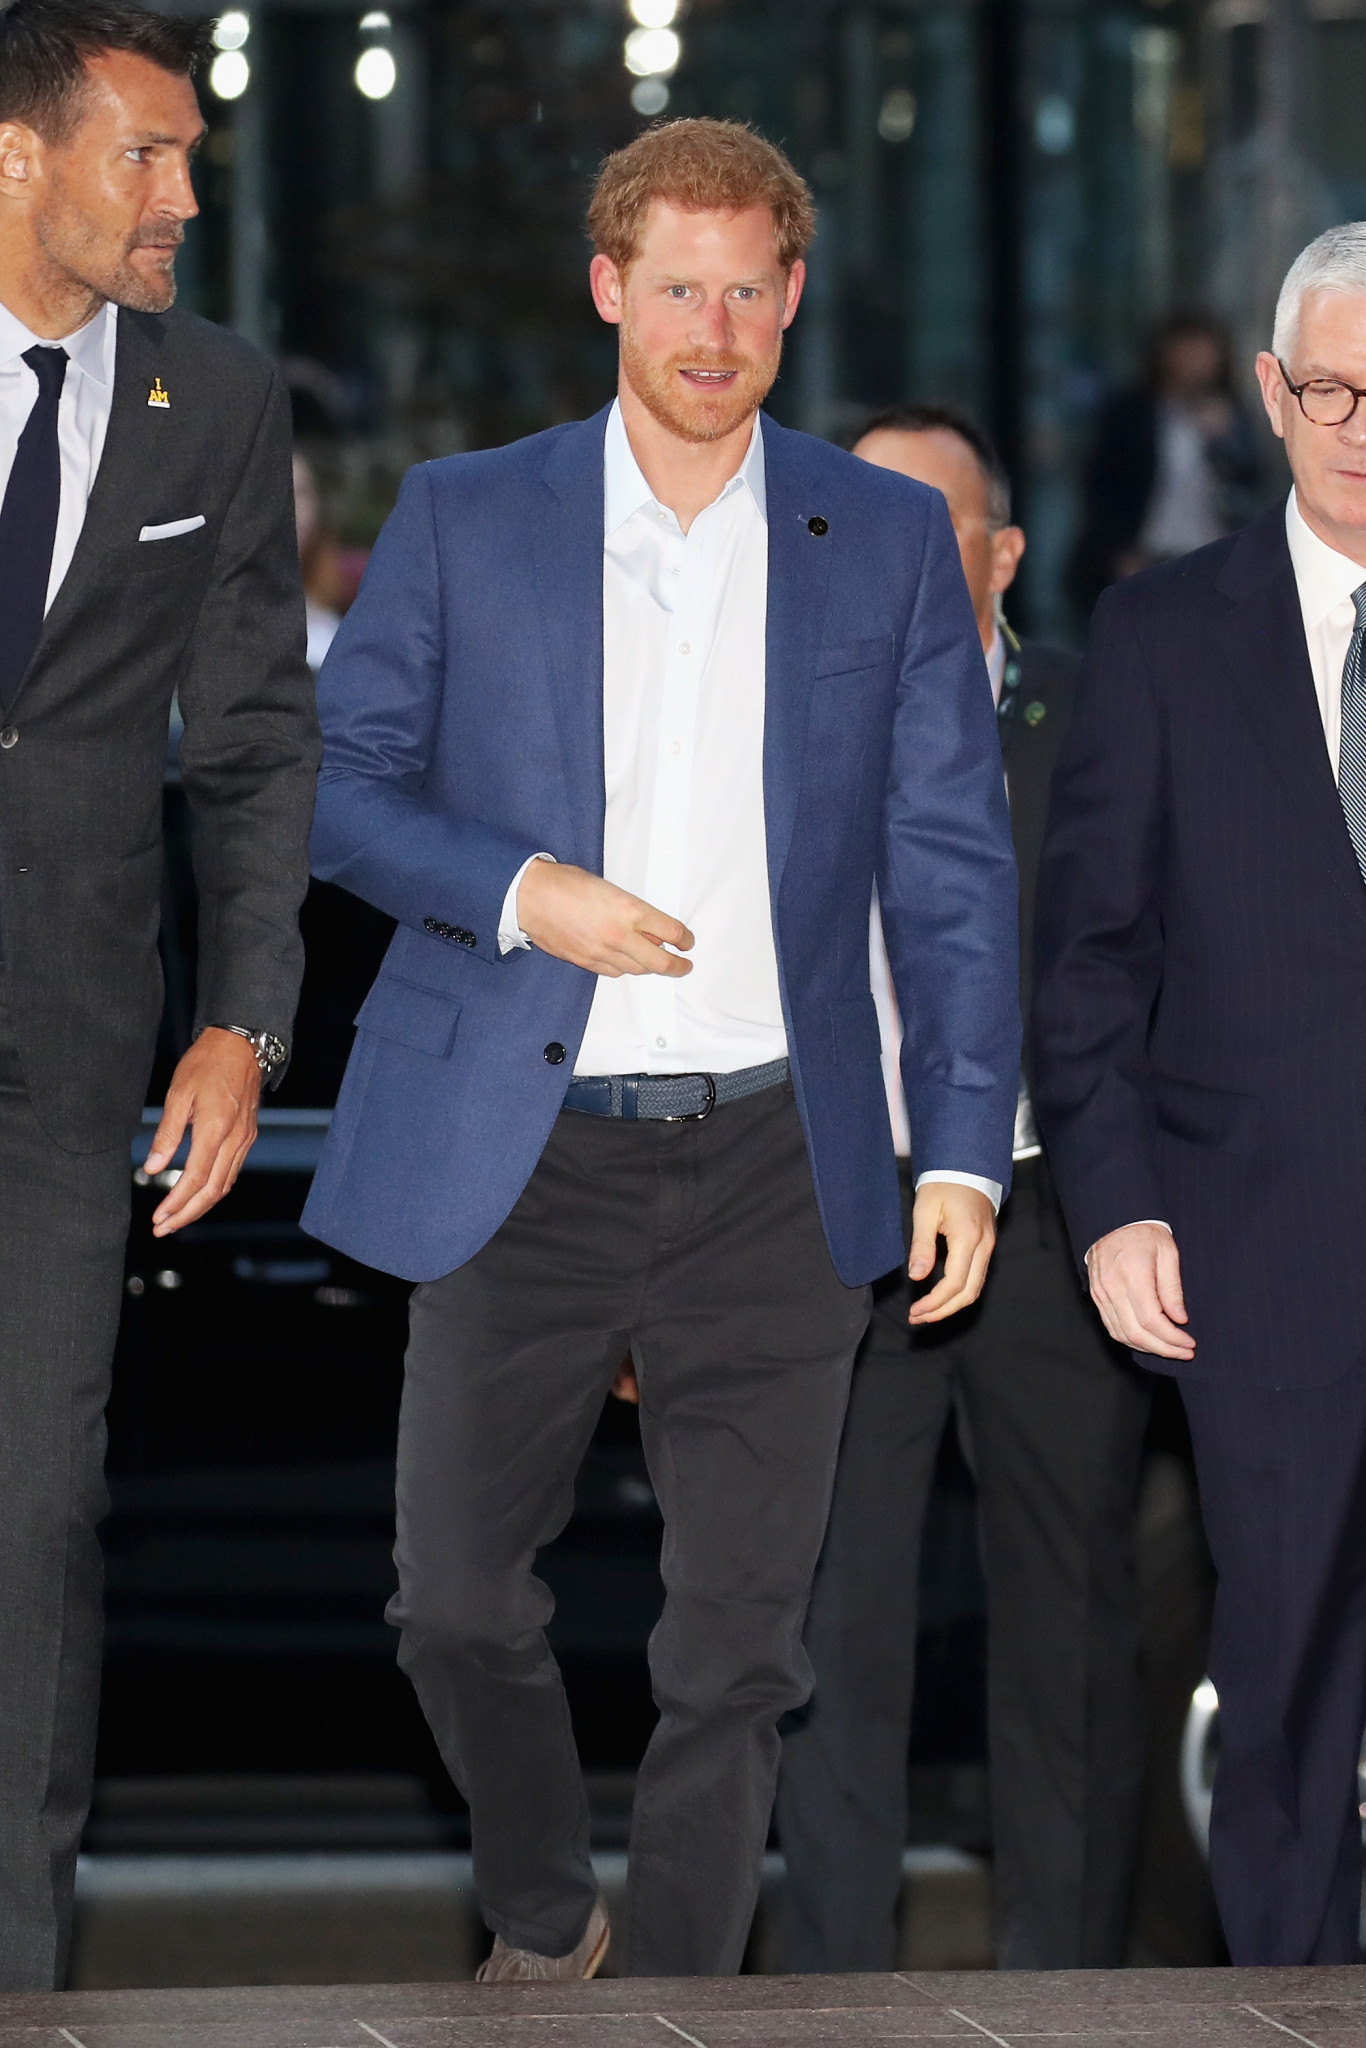 Prince Harry arrives for his first official event at the 2017 Invictus Games in Toronto on the eve of competition ©Getty Images